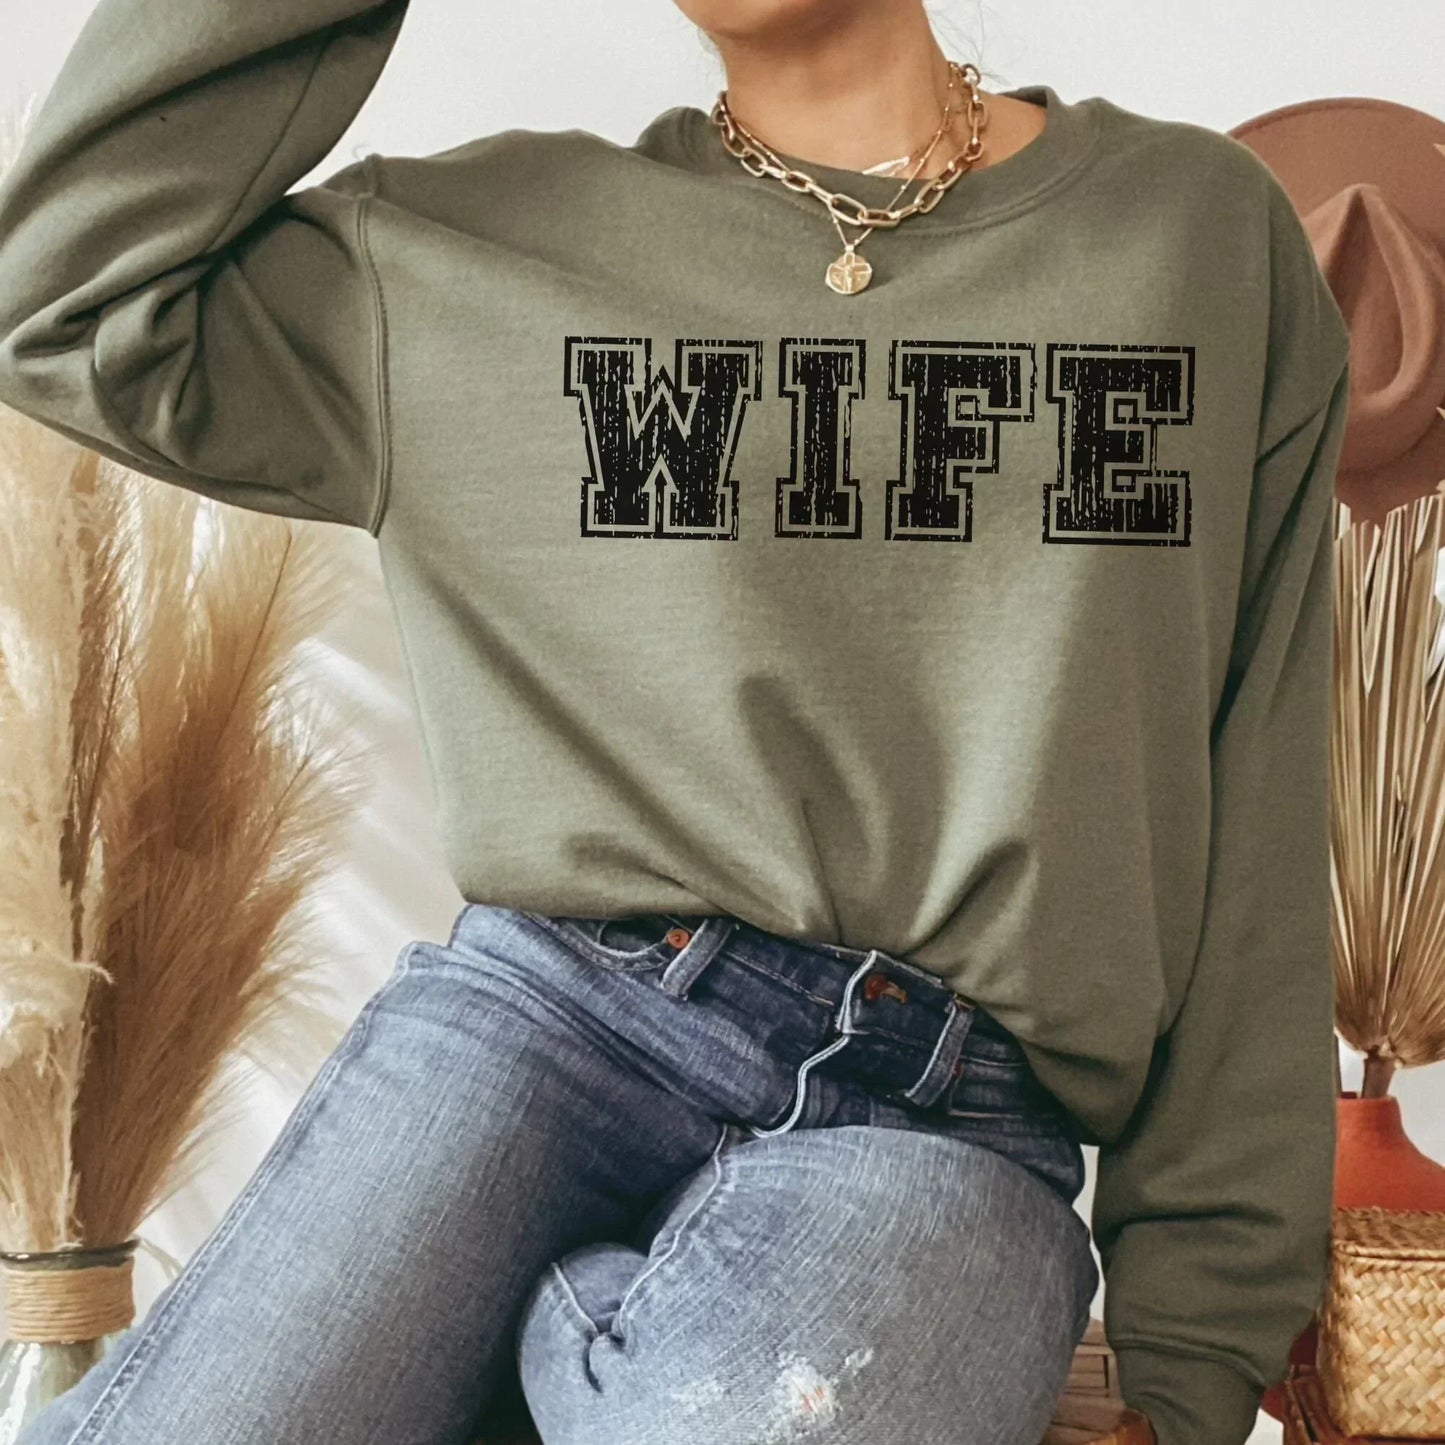 Wife Sweatshirt, Newly Married Sweater, Getting Ready Outfit, Future Mrs, Team Bride Shirt, Wife Hoodie, Gift for Bride, Crewneck Sweater HMDesignStudioUS